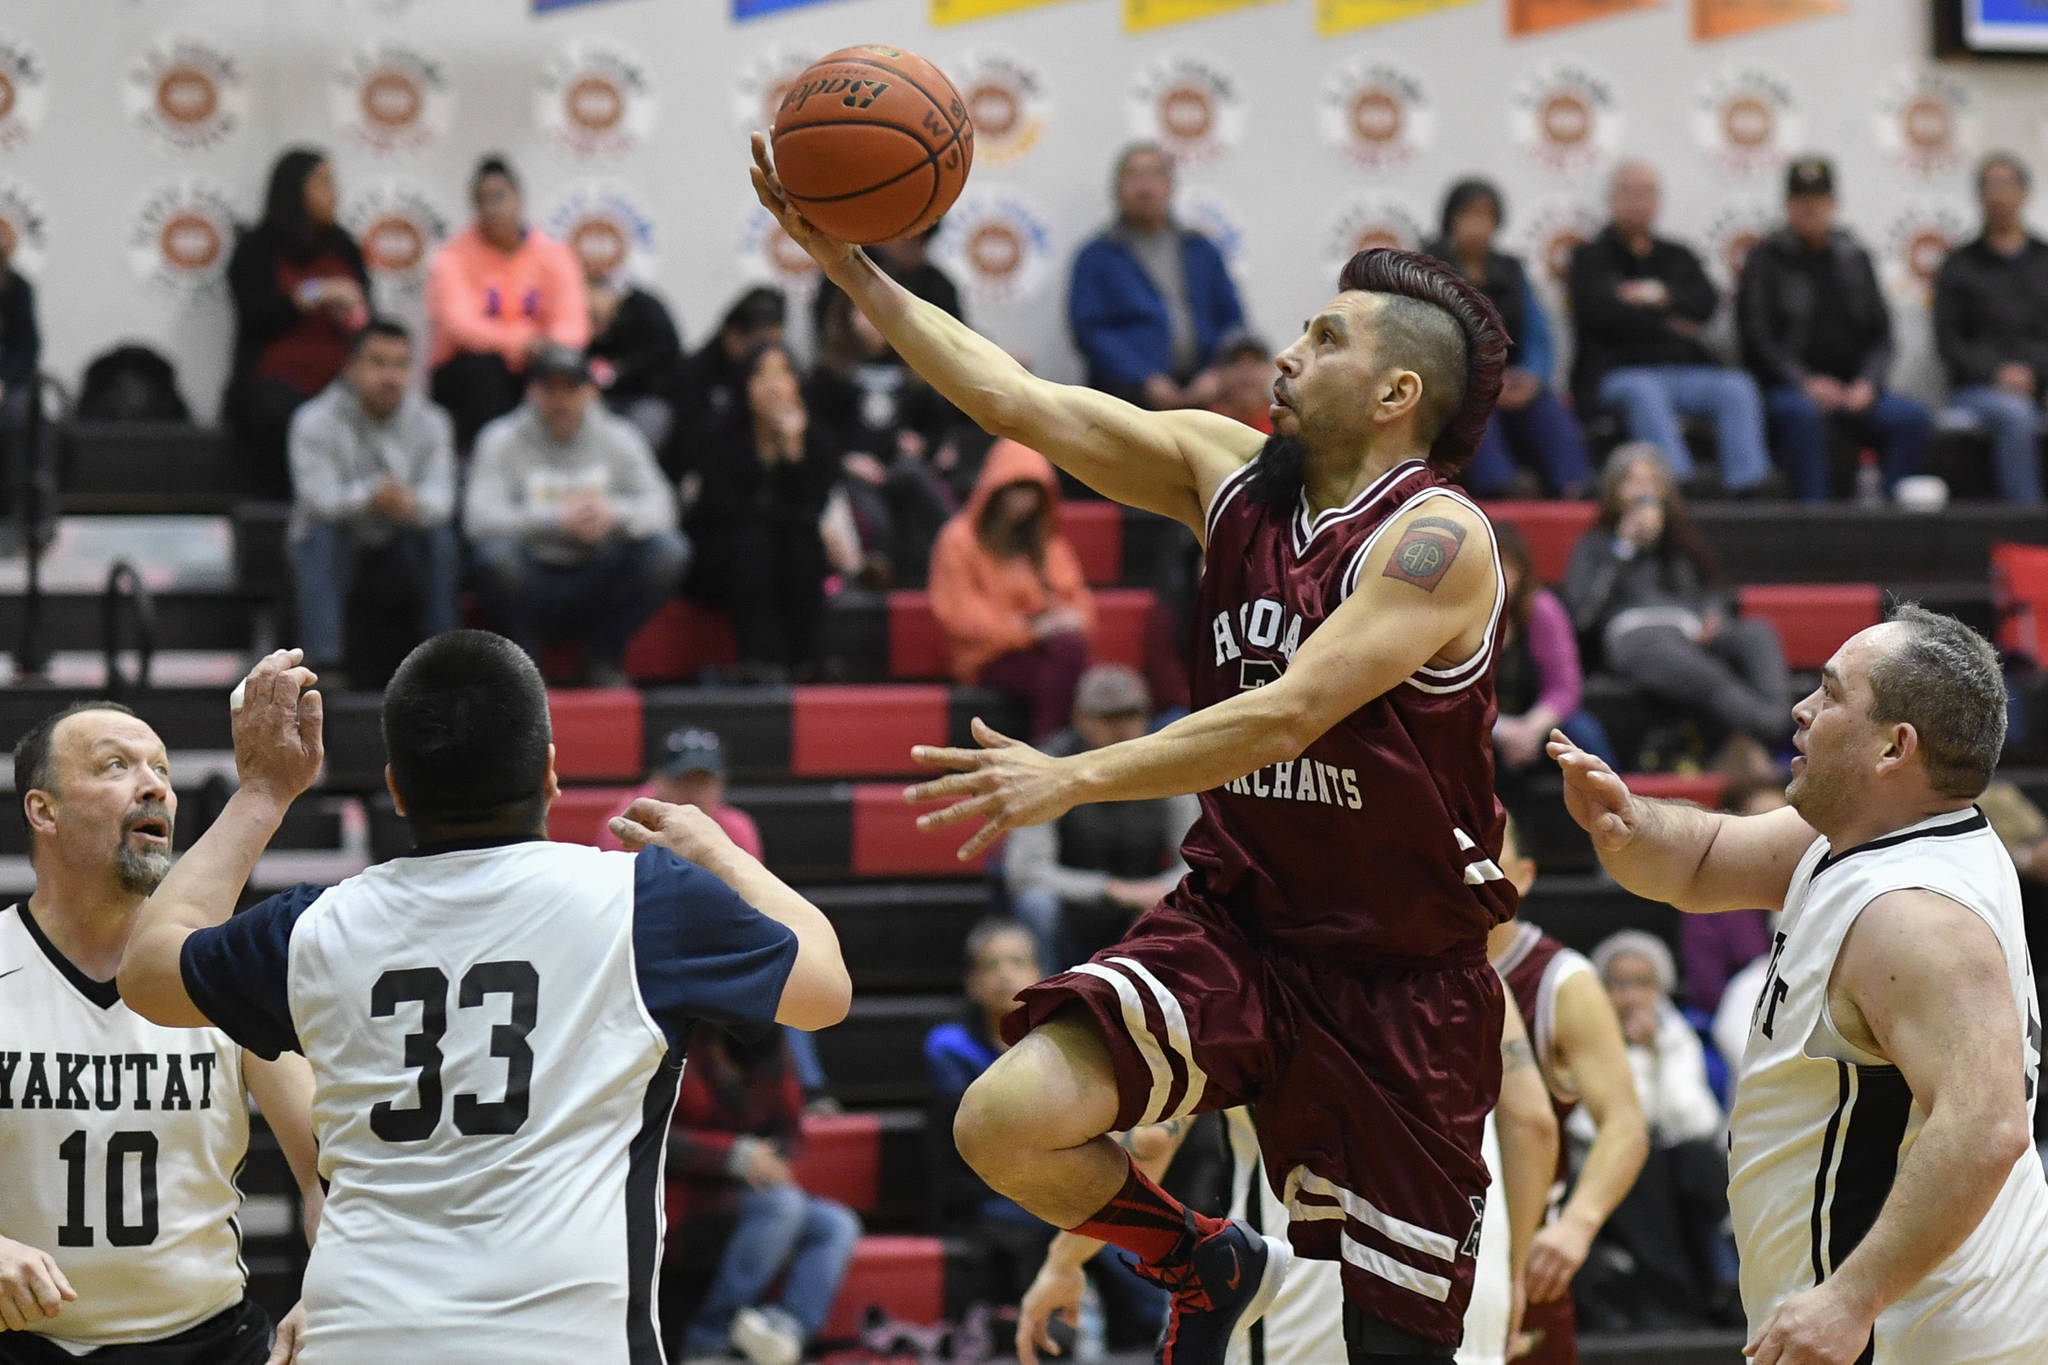 Hoonah’s Marti Fred sails to the basket over Hoonah in the Masters bracket game at the Gold Medal Basketball Tournament on Thursday, March 21, 2019. (Michael Penn | Juneau Empire)